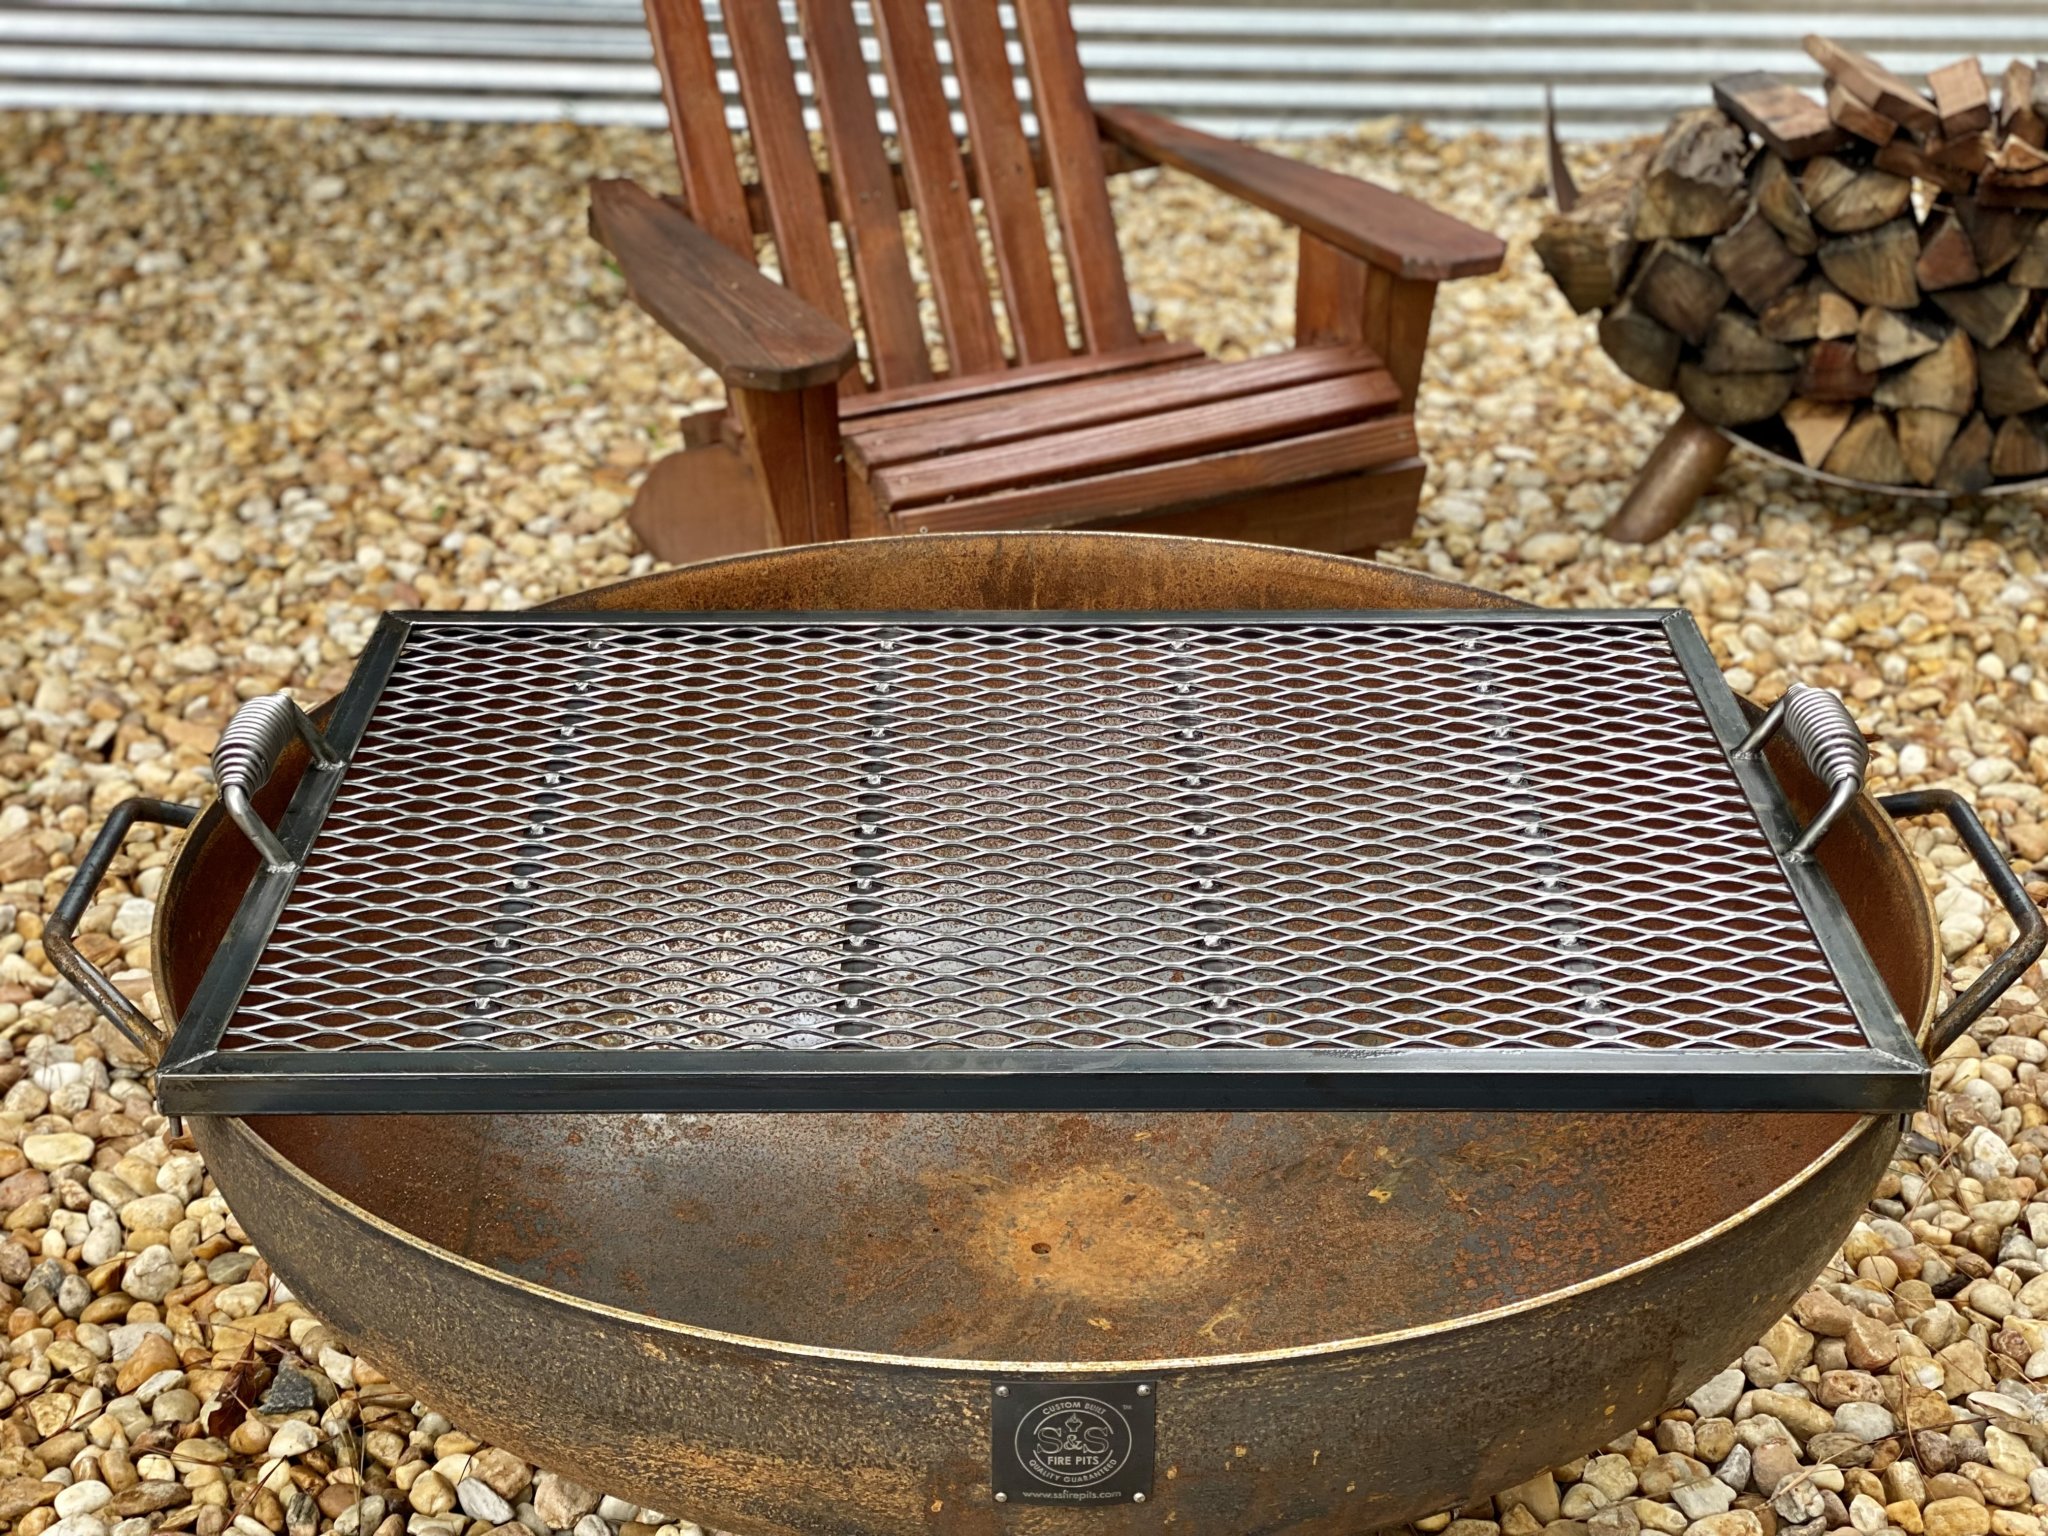 Fire Pit Cooking Grates Cooking Grates For Fire Pits The Original Steel Fire Pit S S Fire Pits